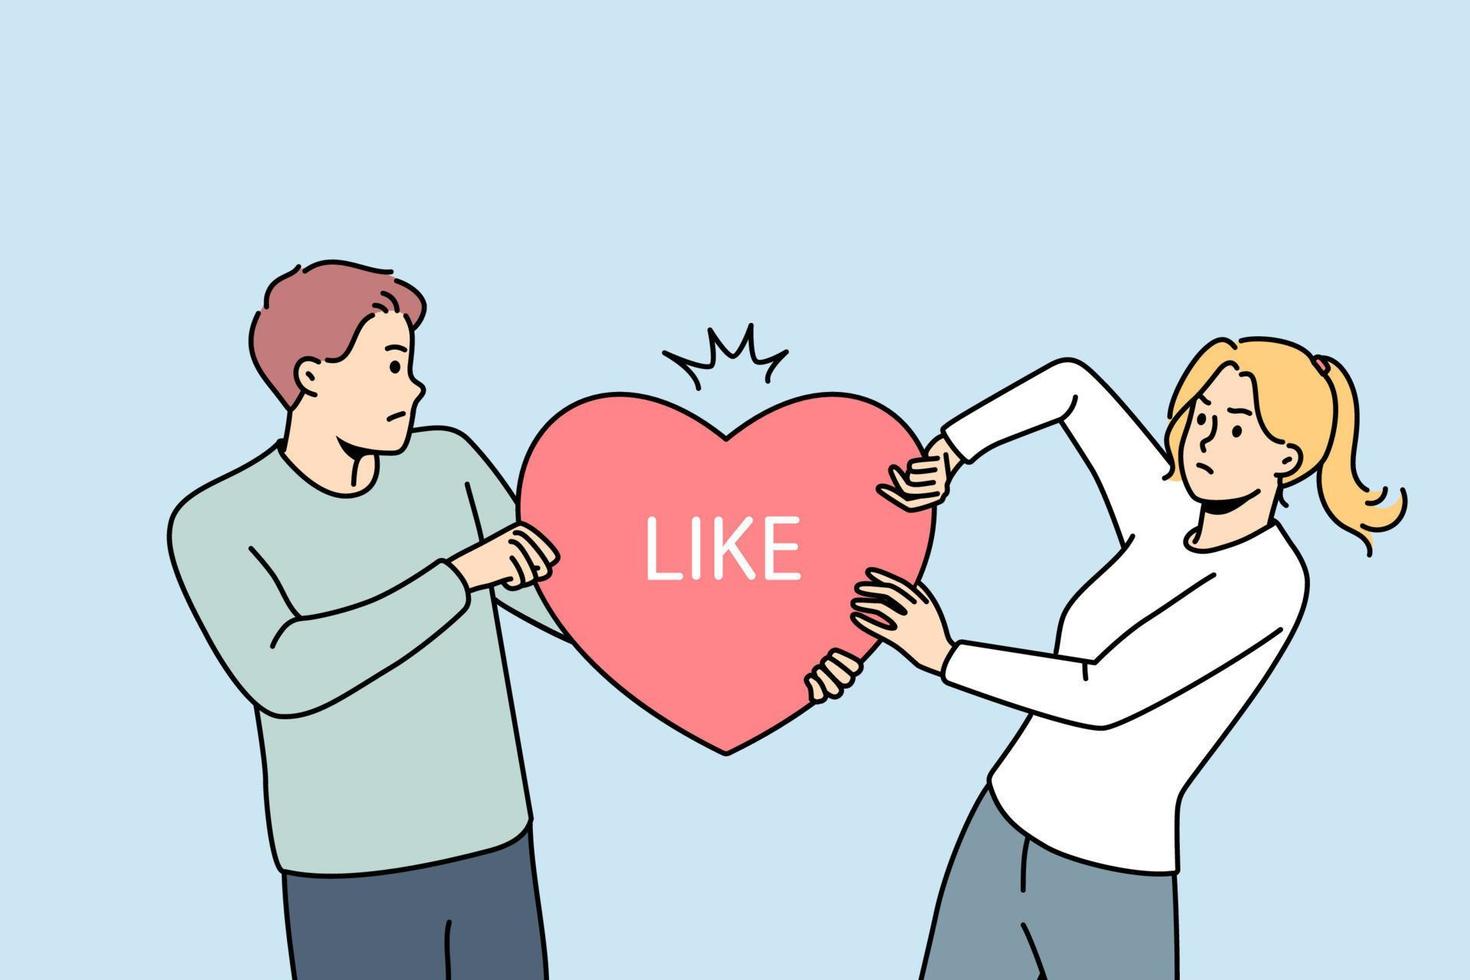 Angry man and woman share likes on social media. Furious male and female influencers tear heart symbol representing popularity on internet. Rivalry on web. Vector illustration.